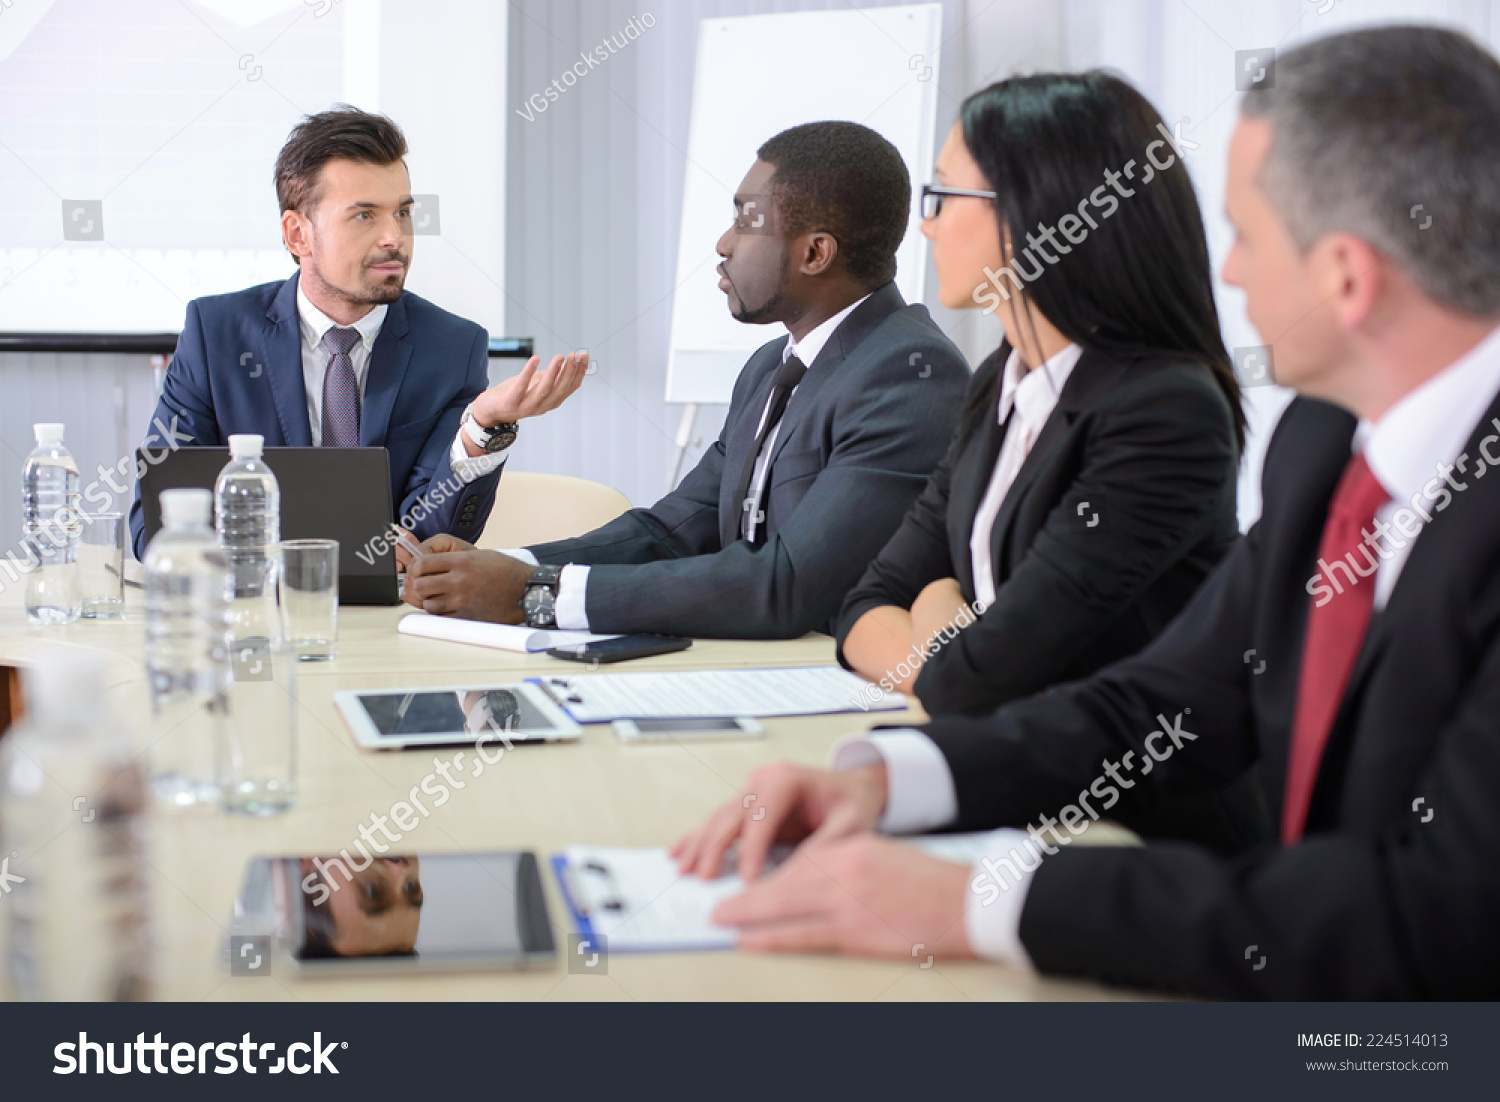 Business conference. Business meeting. Business people in formalwear discussing something while sitting together at the table #224514013